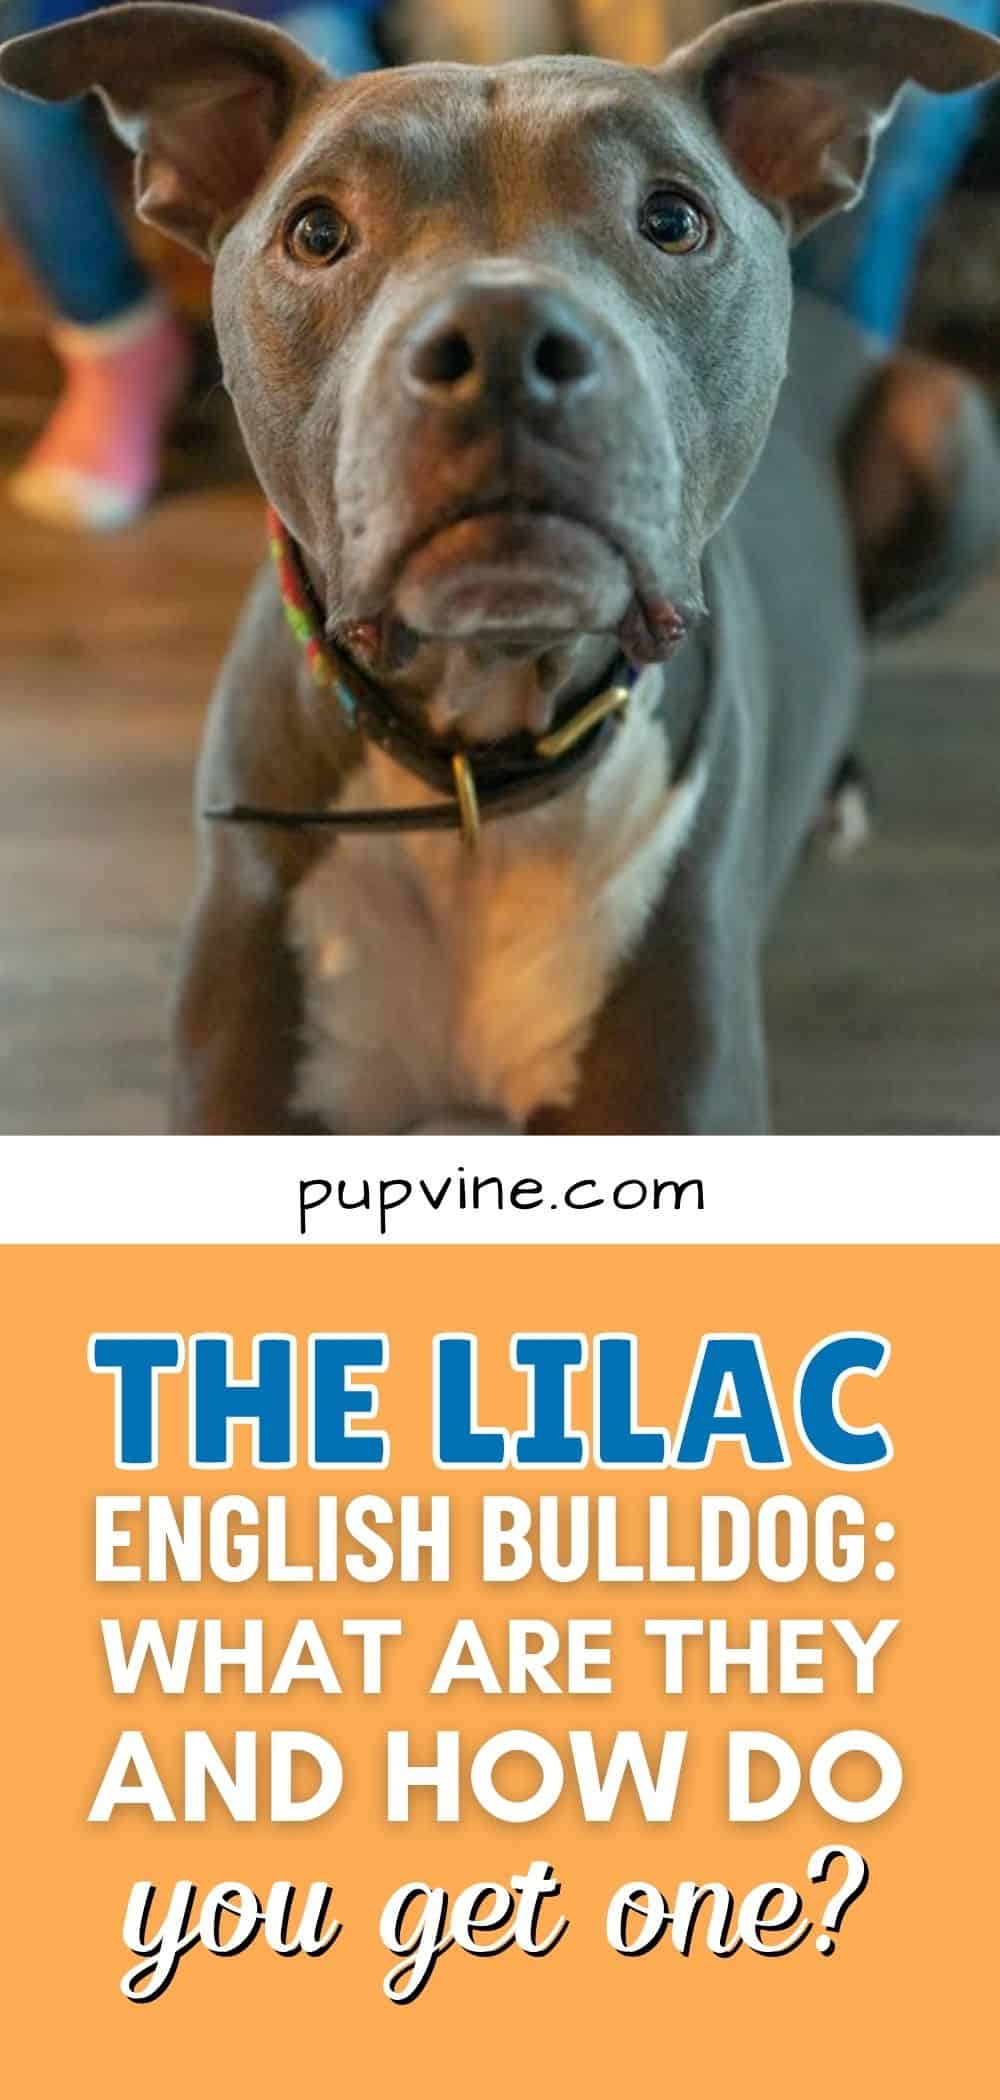 The Lilac English Bulldog: What Are They And How Do You Get One?